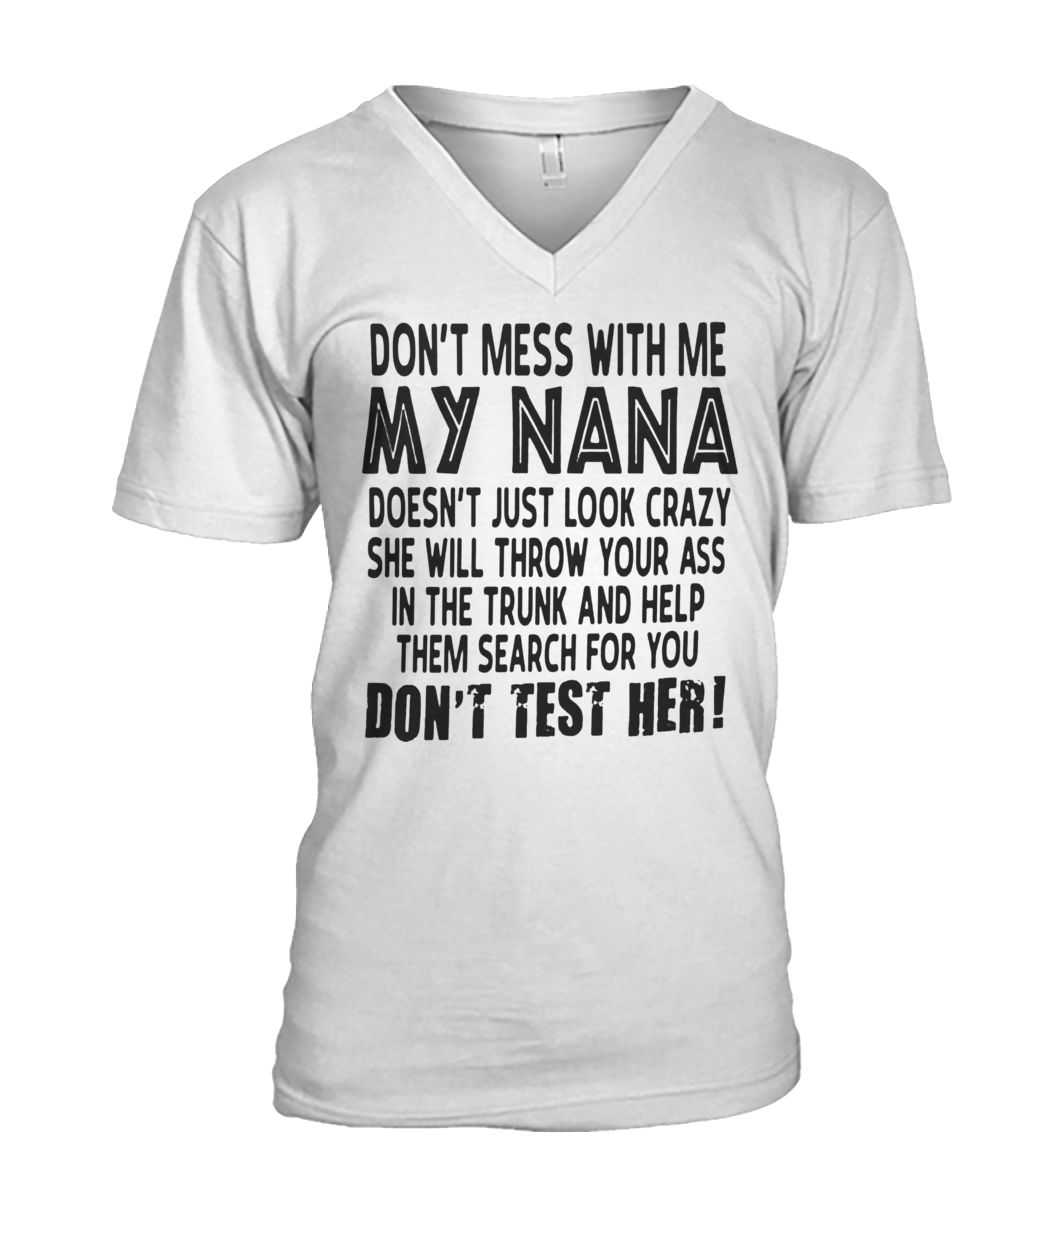 Don't mess with me my nana doesn't just look crazy don't test her mens v-neck